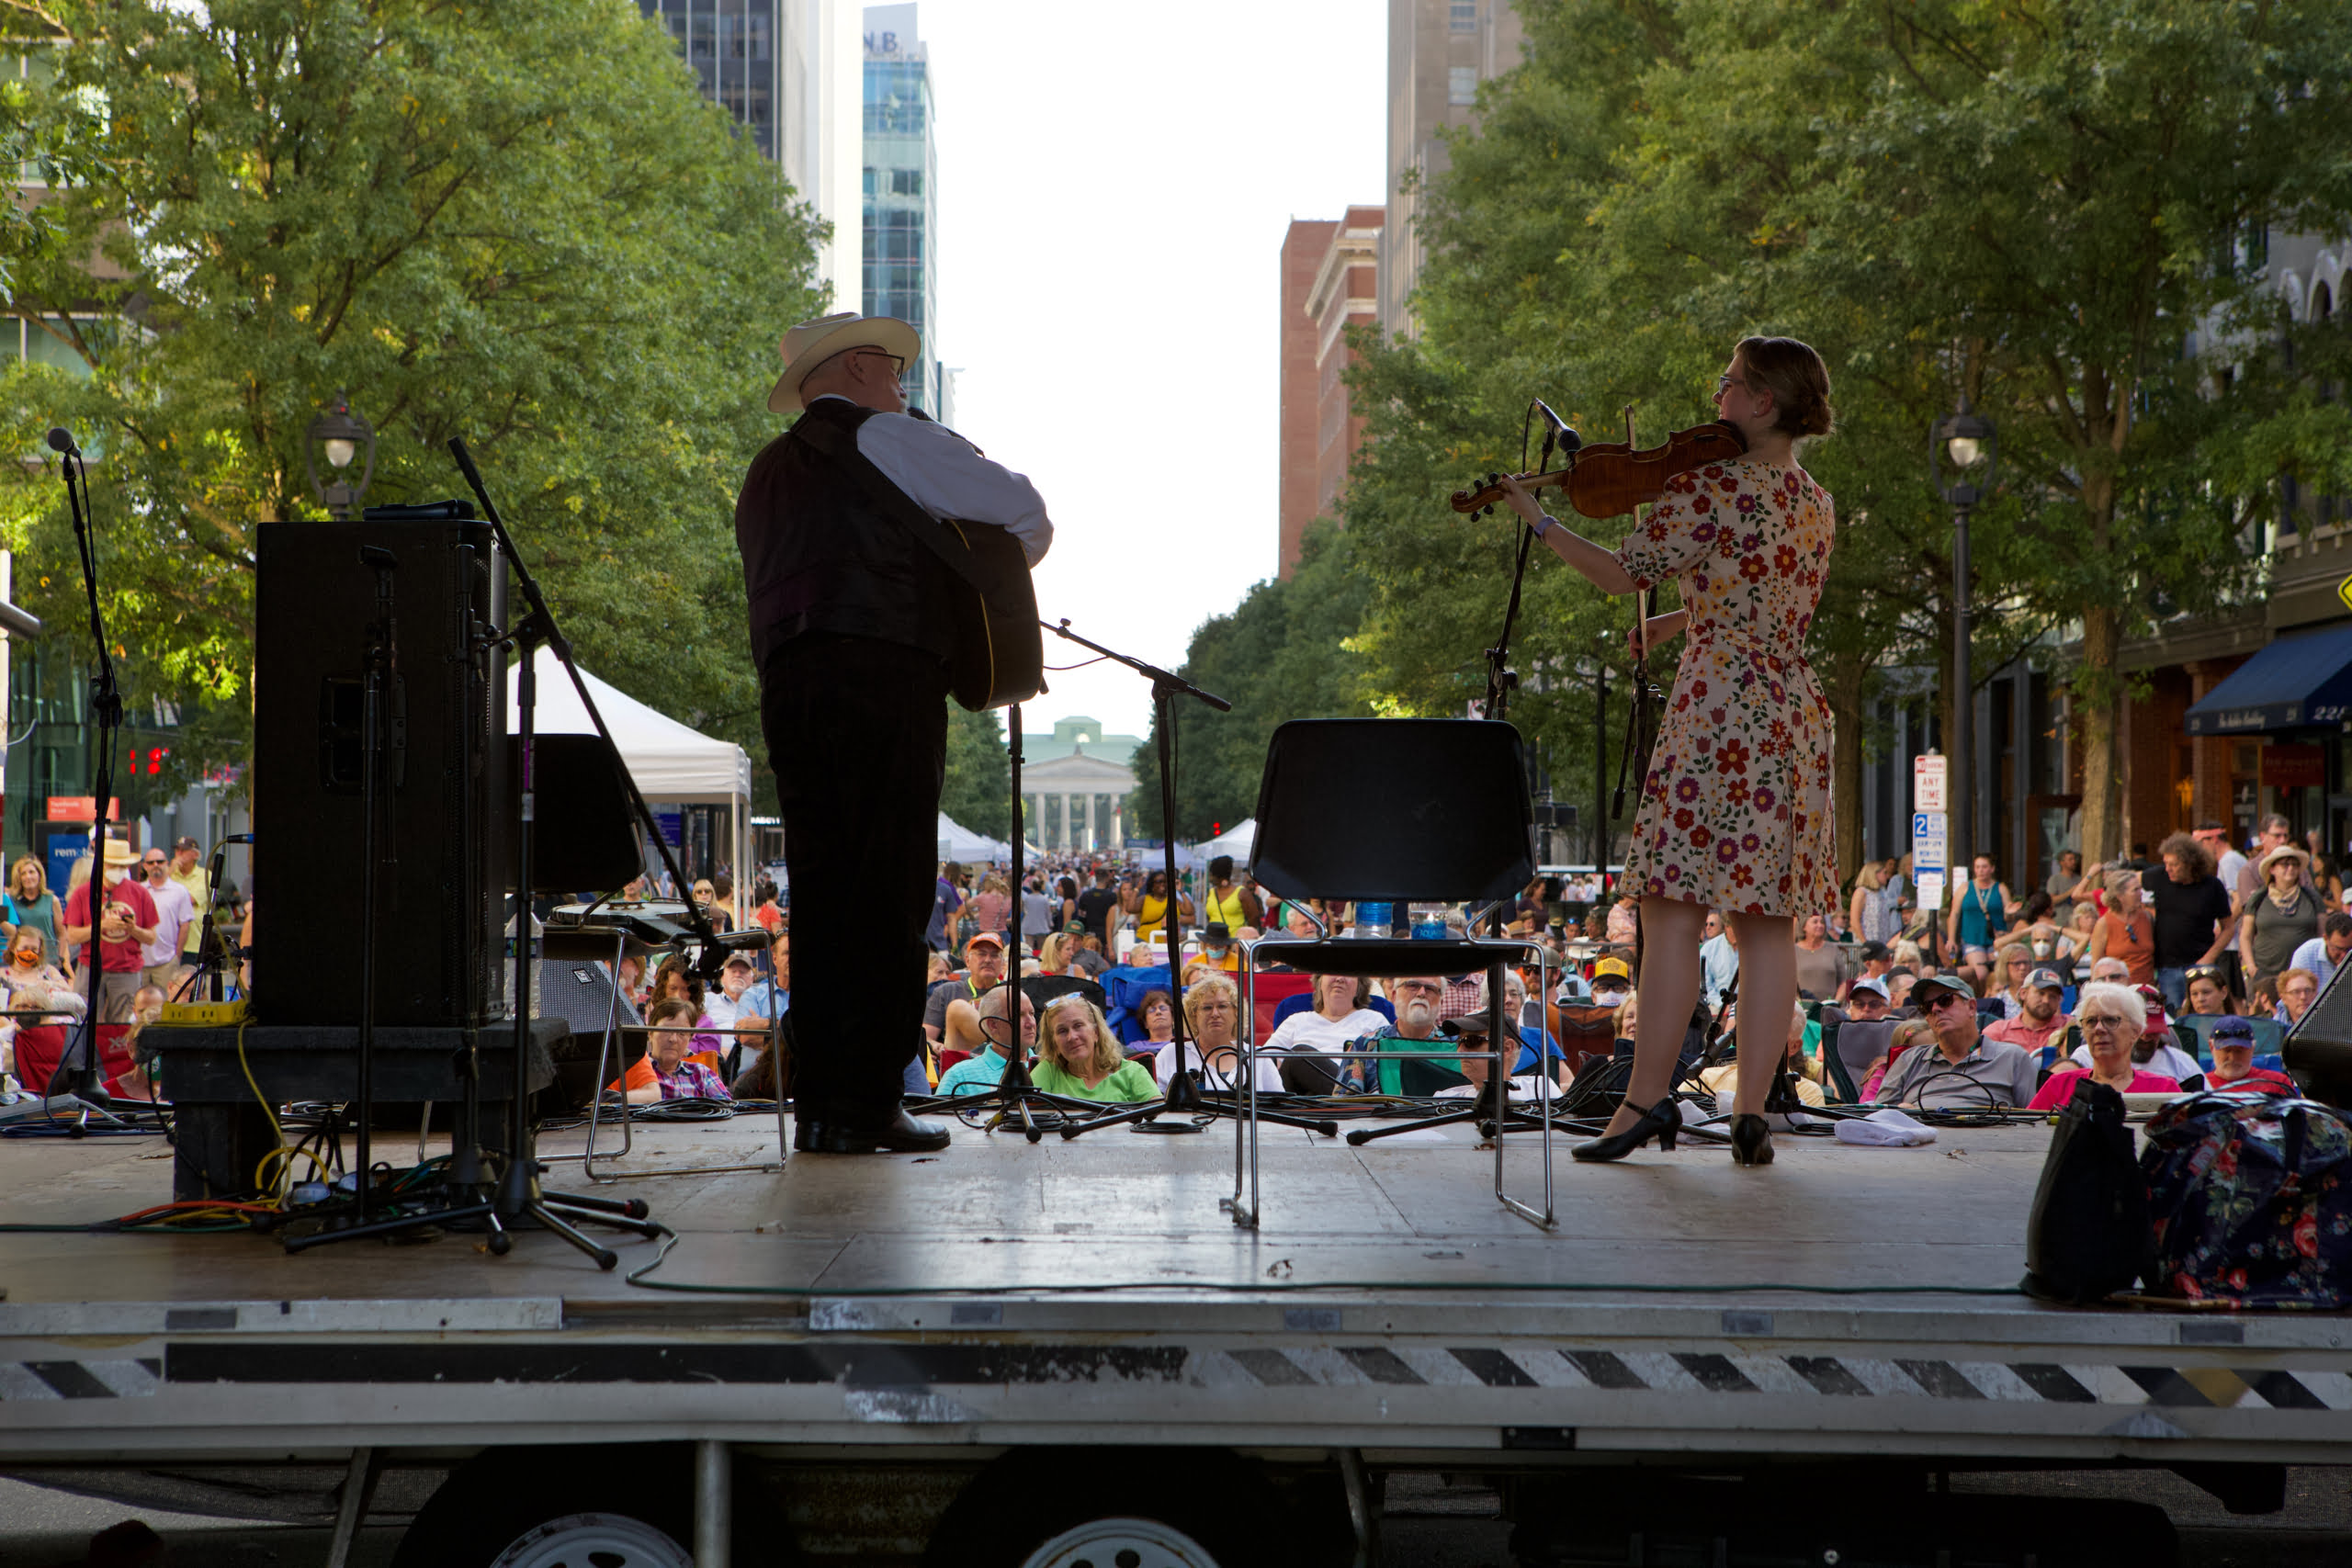 Joe Newberry and April Verch performing at the Wide Open Bluegrass Festival in 2019. The event caps off IBMA's World of Bluegrass and that year drew more than 200,000 people downtown.